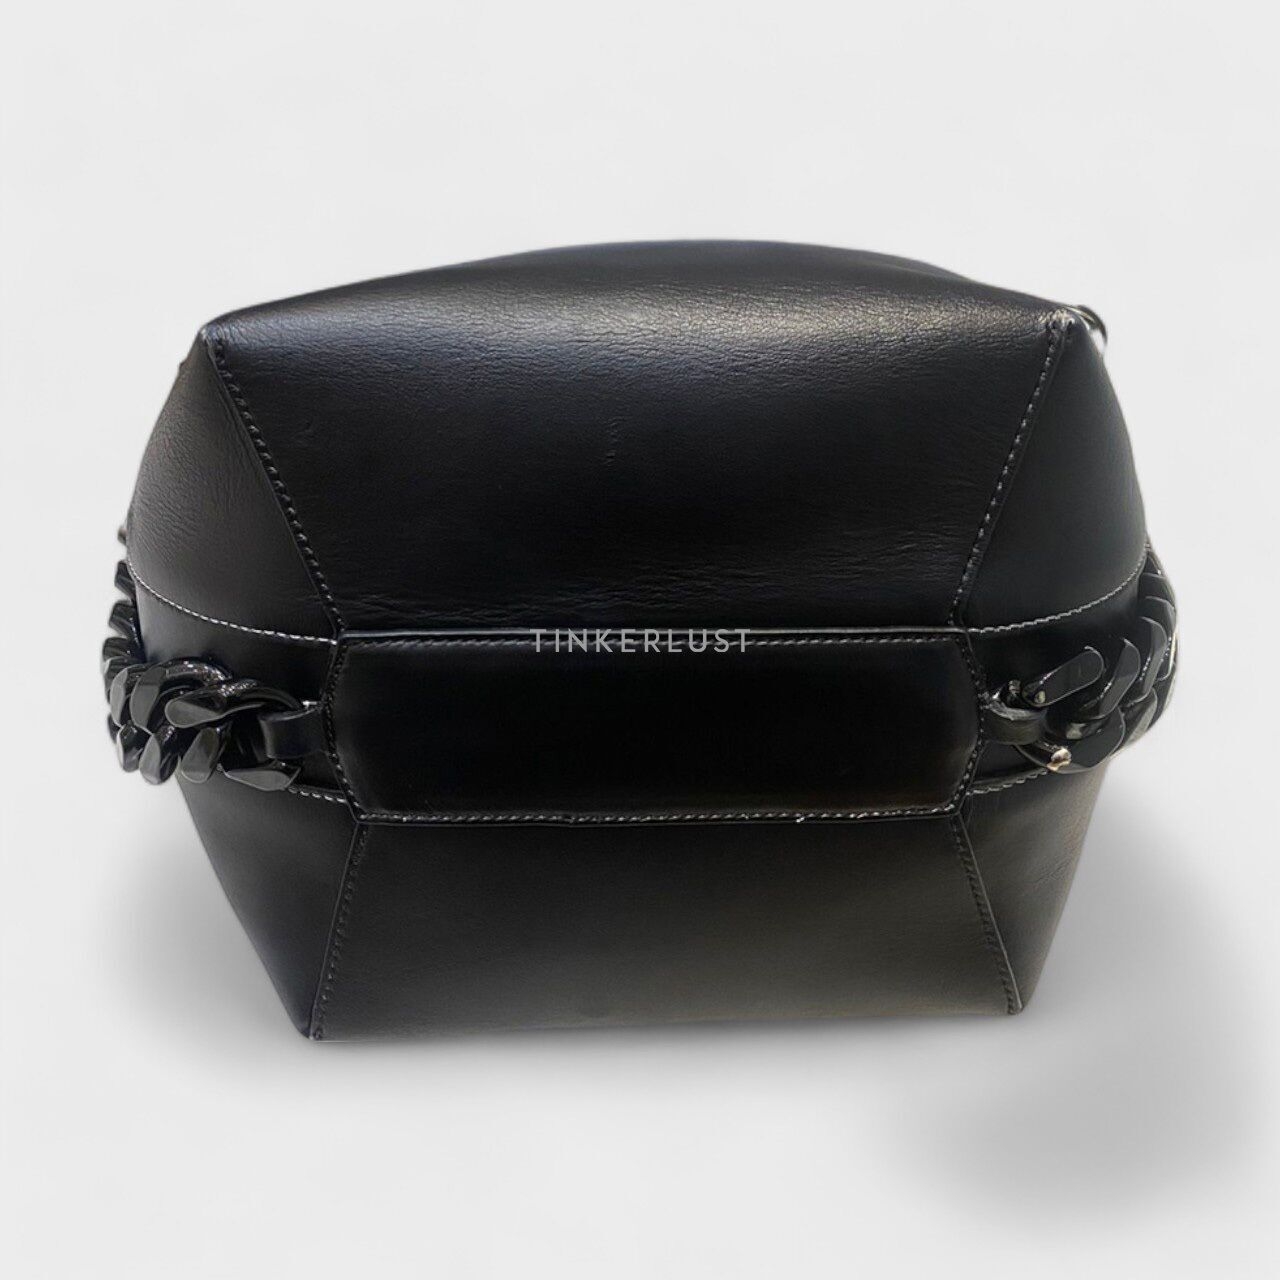 Givenchy Infinity Medium Ombre Leather Shoulder Bag